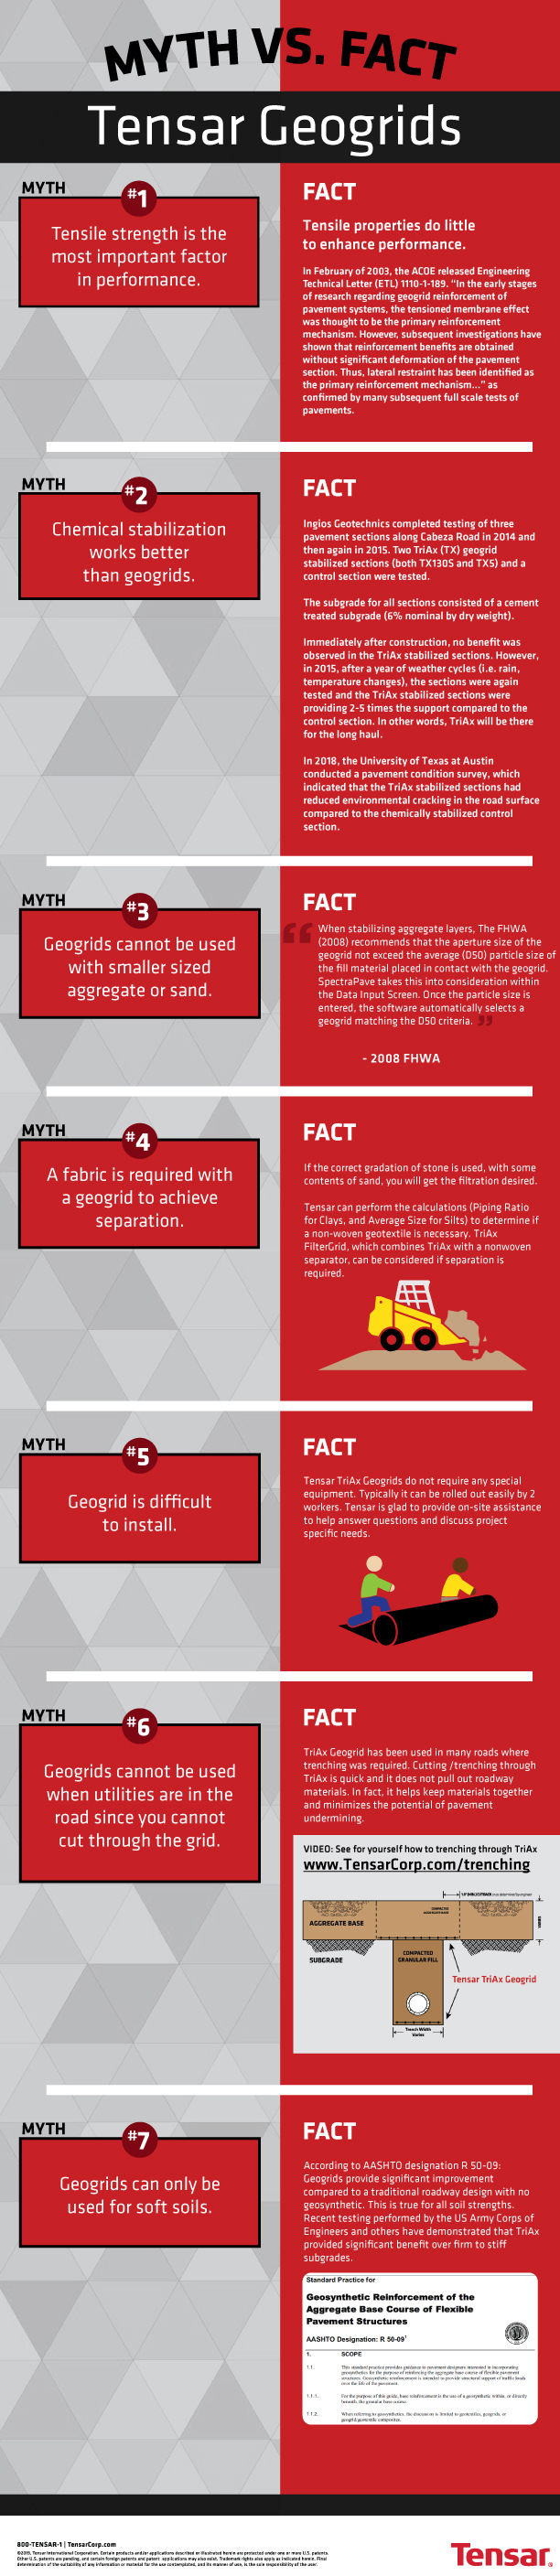 Tensar TriAx Geogrid Myths and Facts Infographic